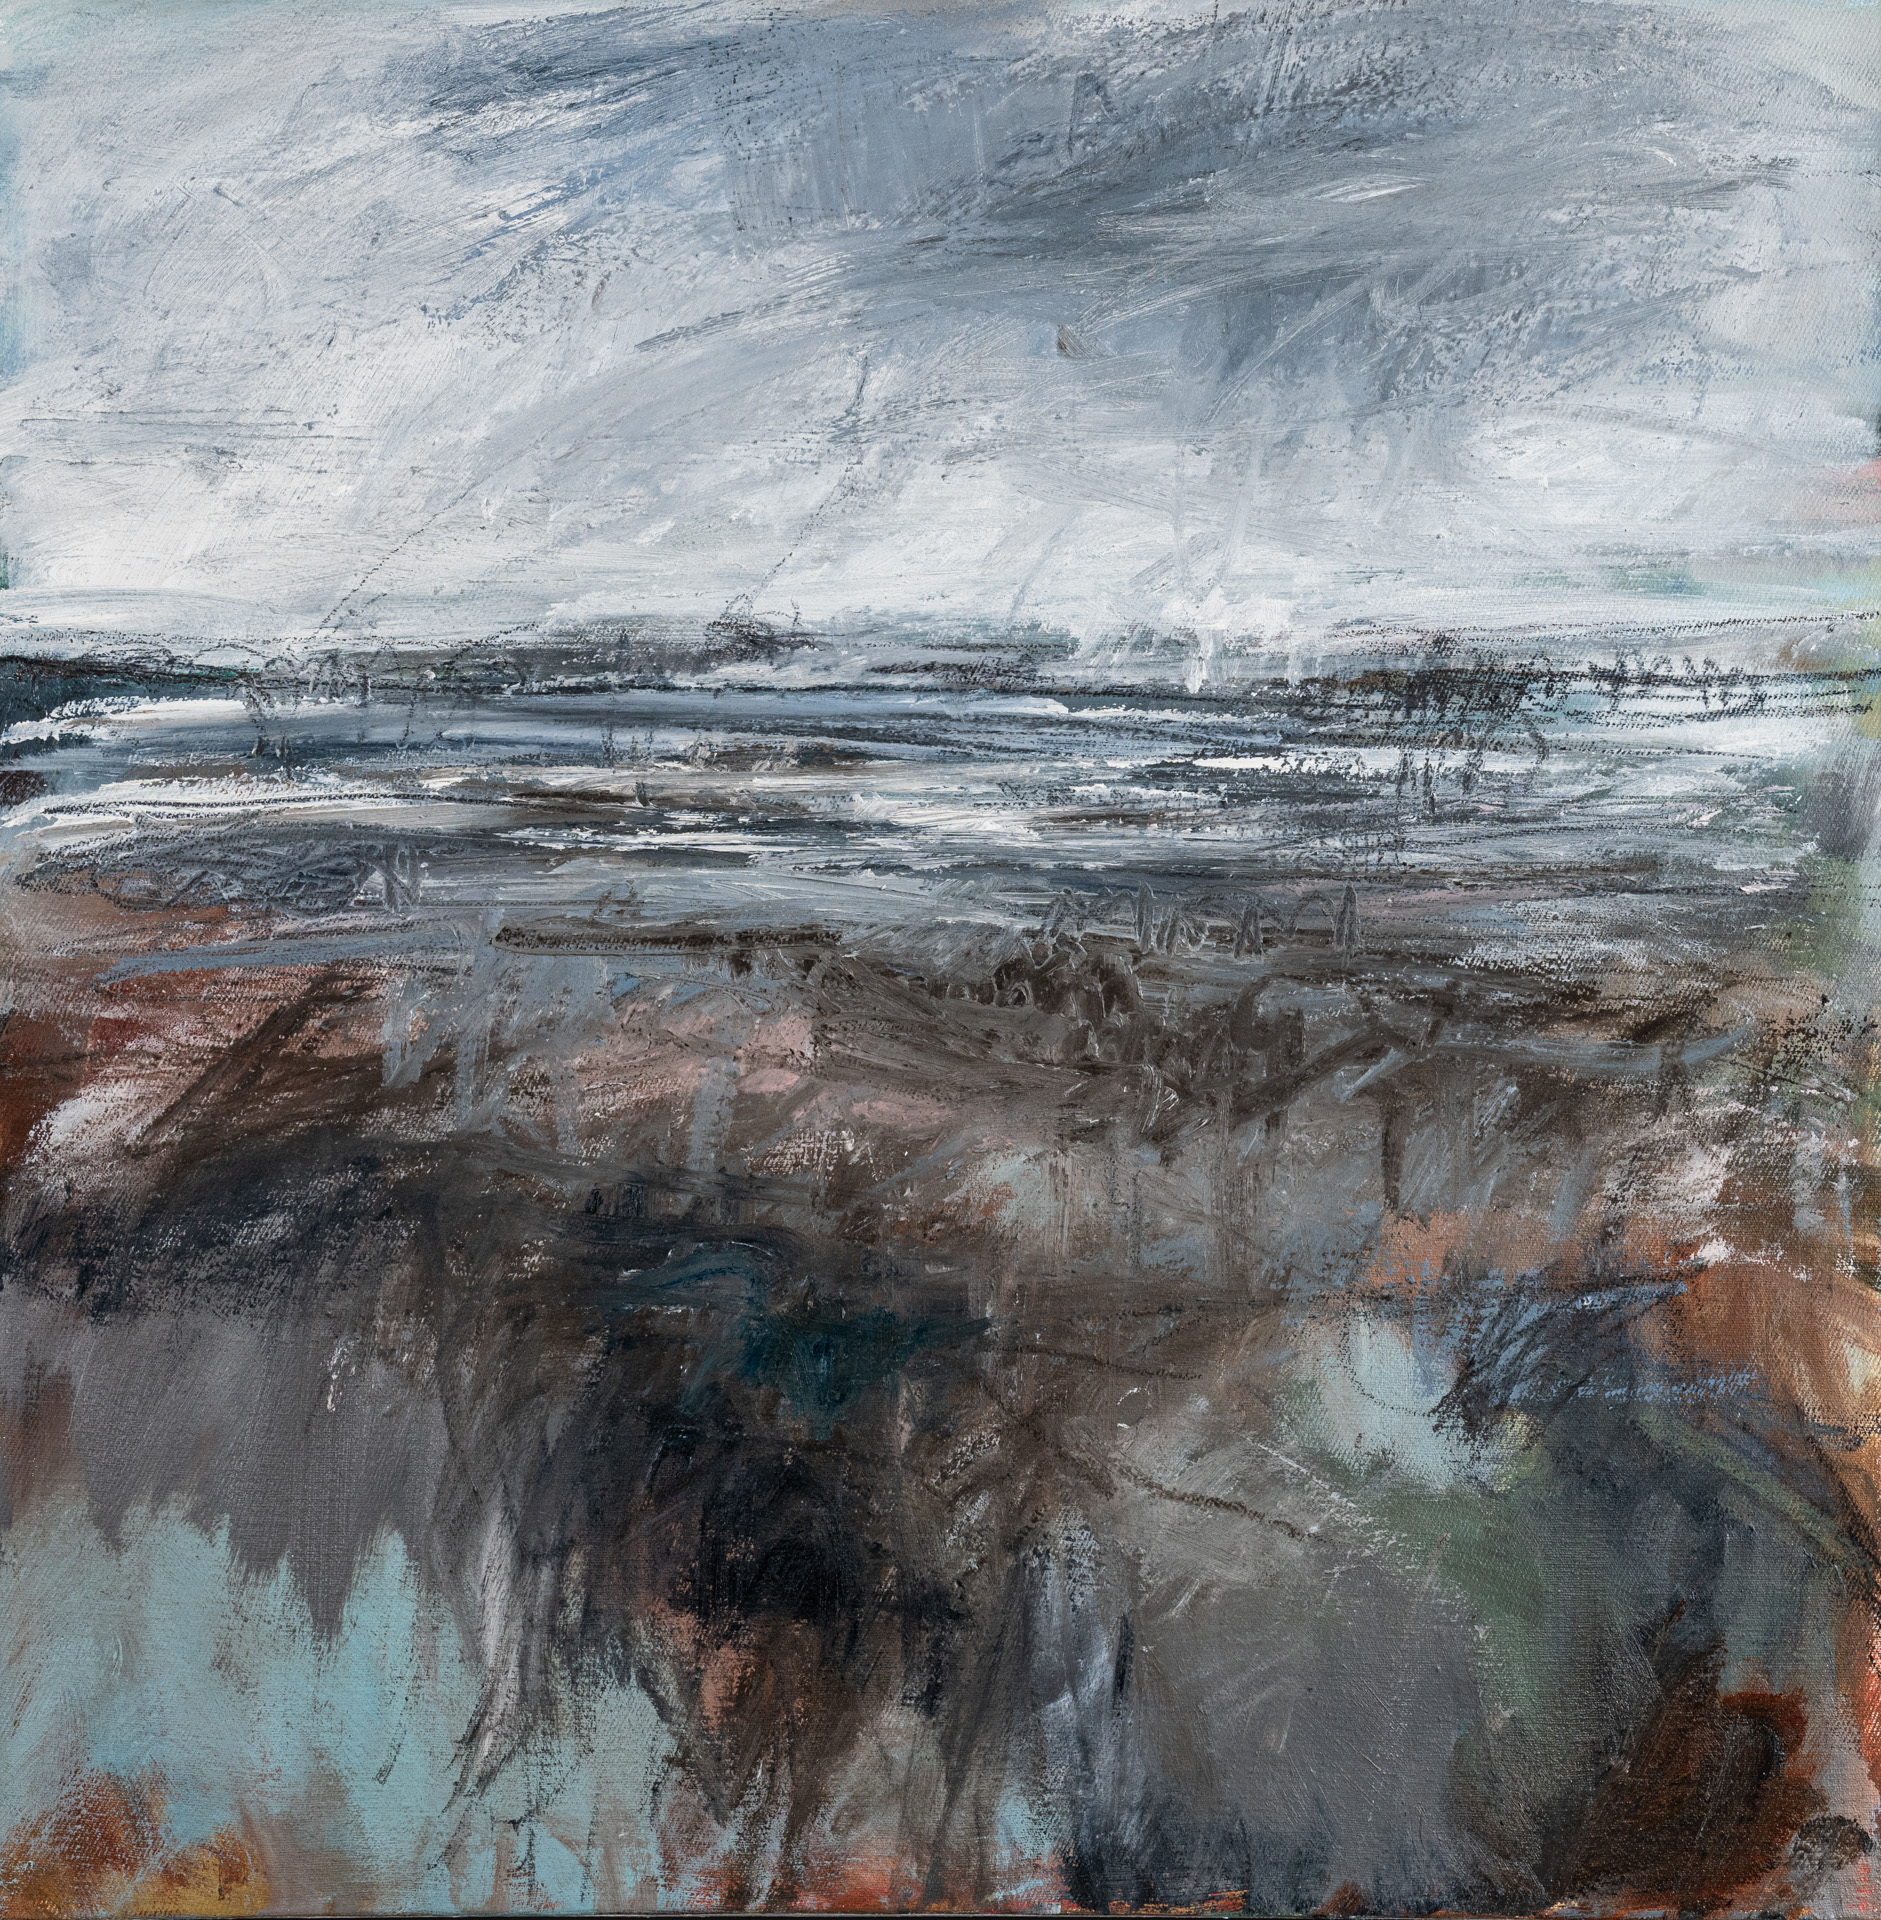 Rain Sets In, oil and charcoal on canvas by Janine Baldwin PS